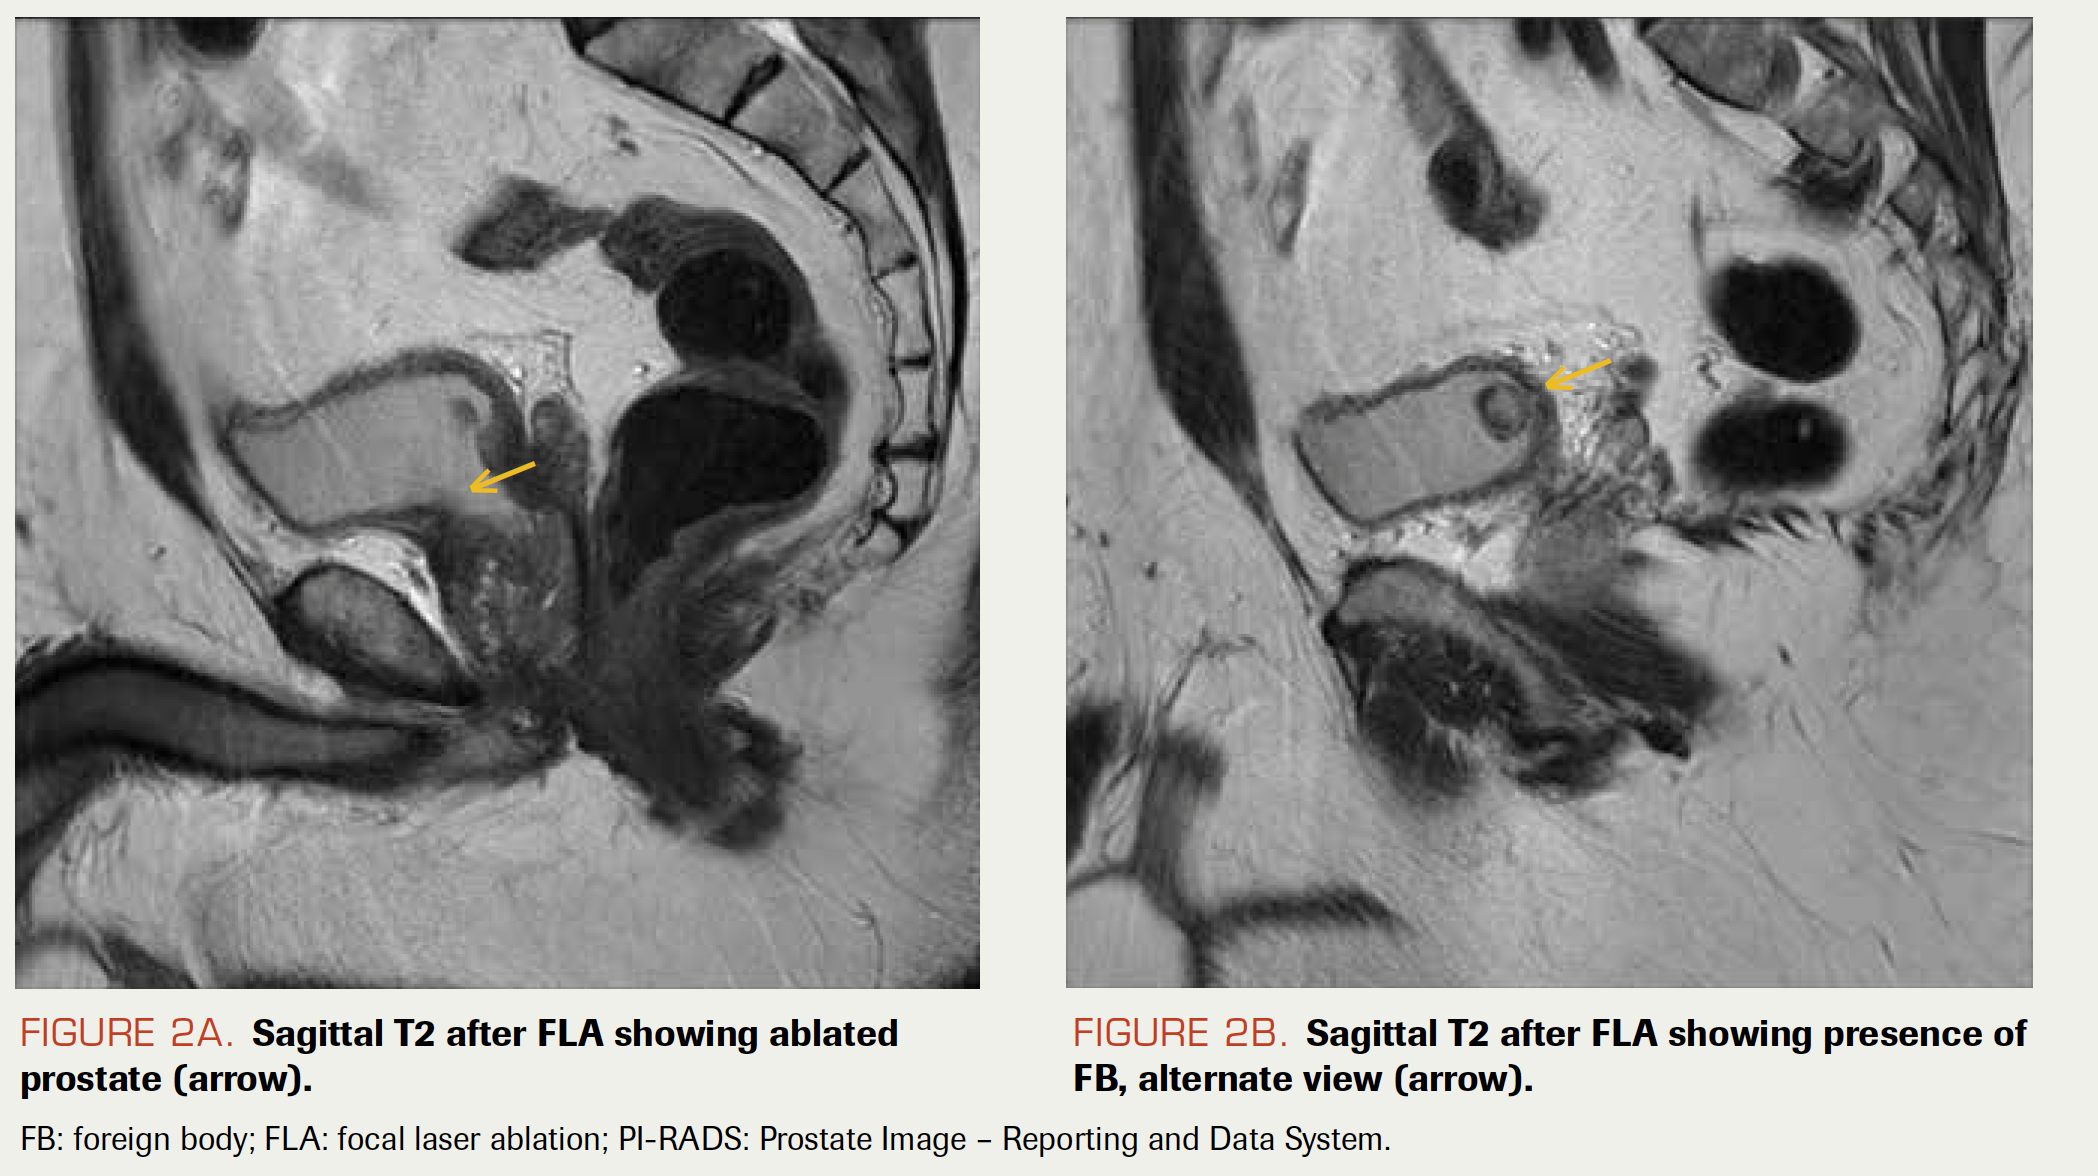 FIGURE 2A. Sagittal T2 after FLA showing ablated prostate (arrow).

FIGURE 2B. Sagittal T2 after FLA showing presence of FB, alternate view (arrow).

FB: foreign body; FLA: focal laser ablation; PI-RADS: Prostate Image – Reporting and Data System.